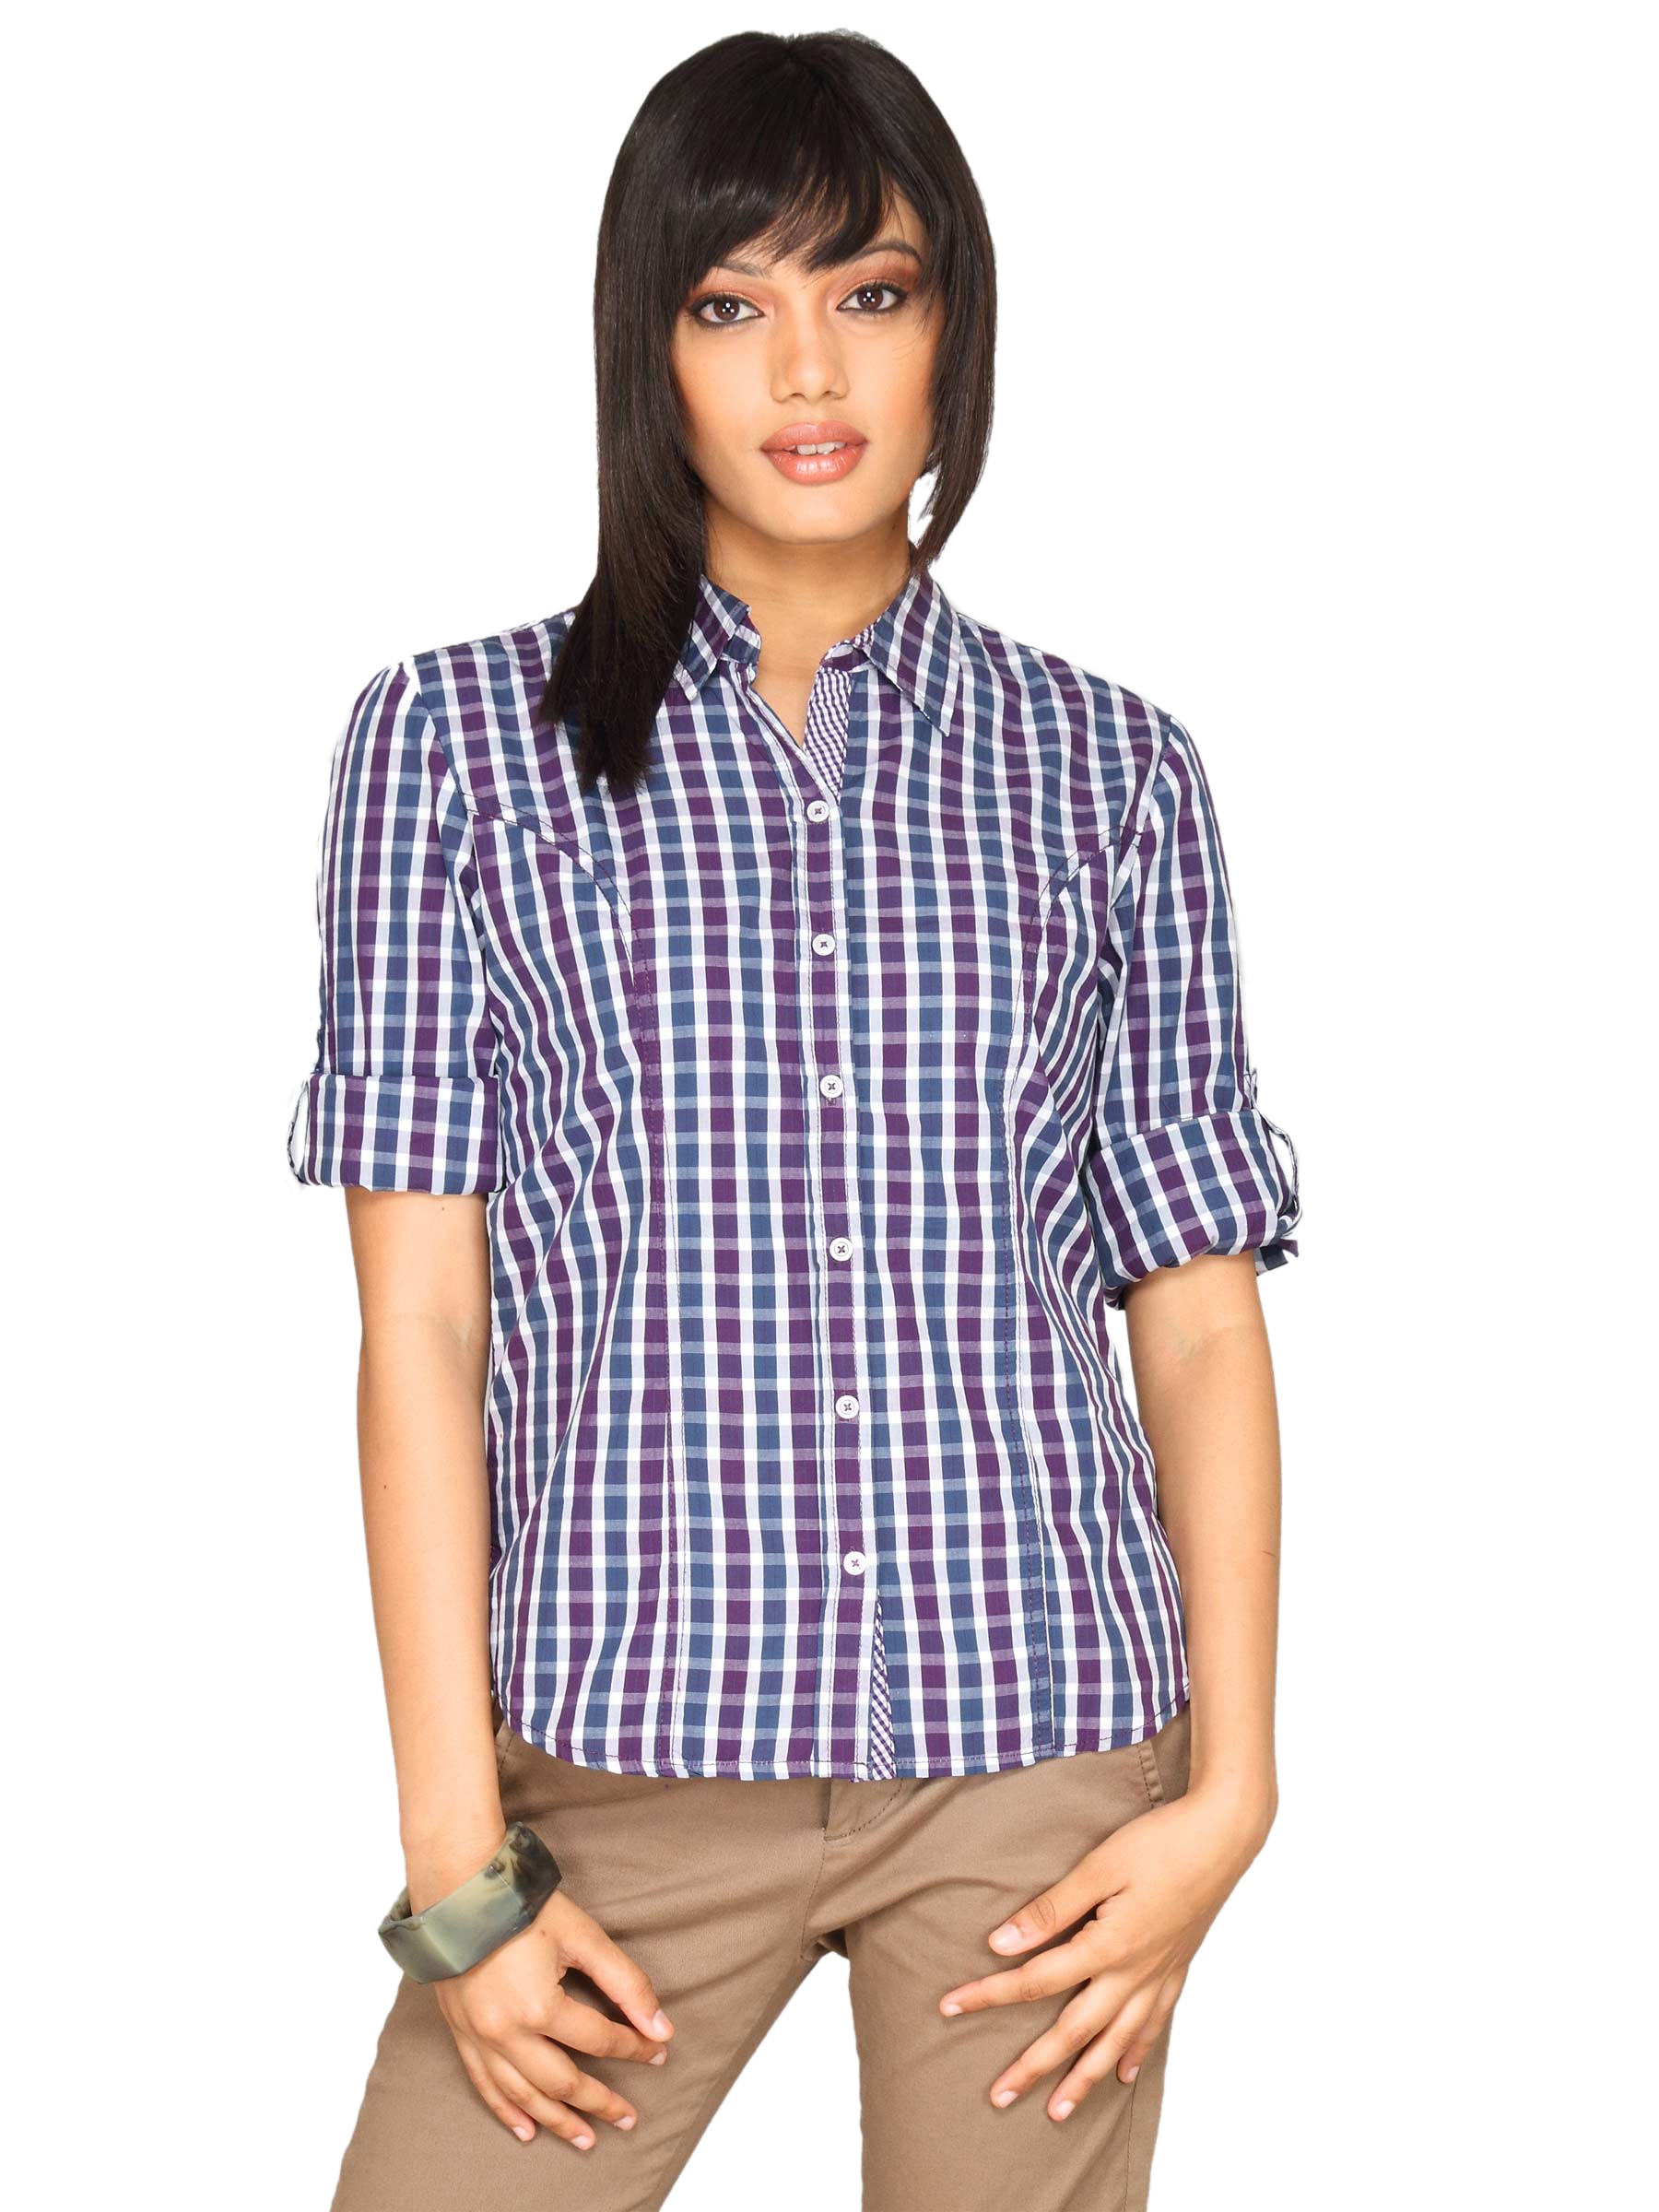 Scullers For Her Women Light Work Purple Check Shirts